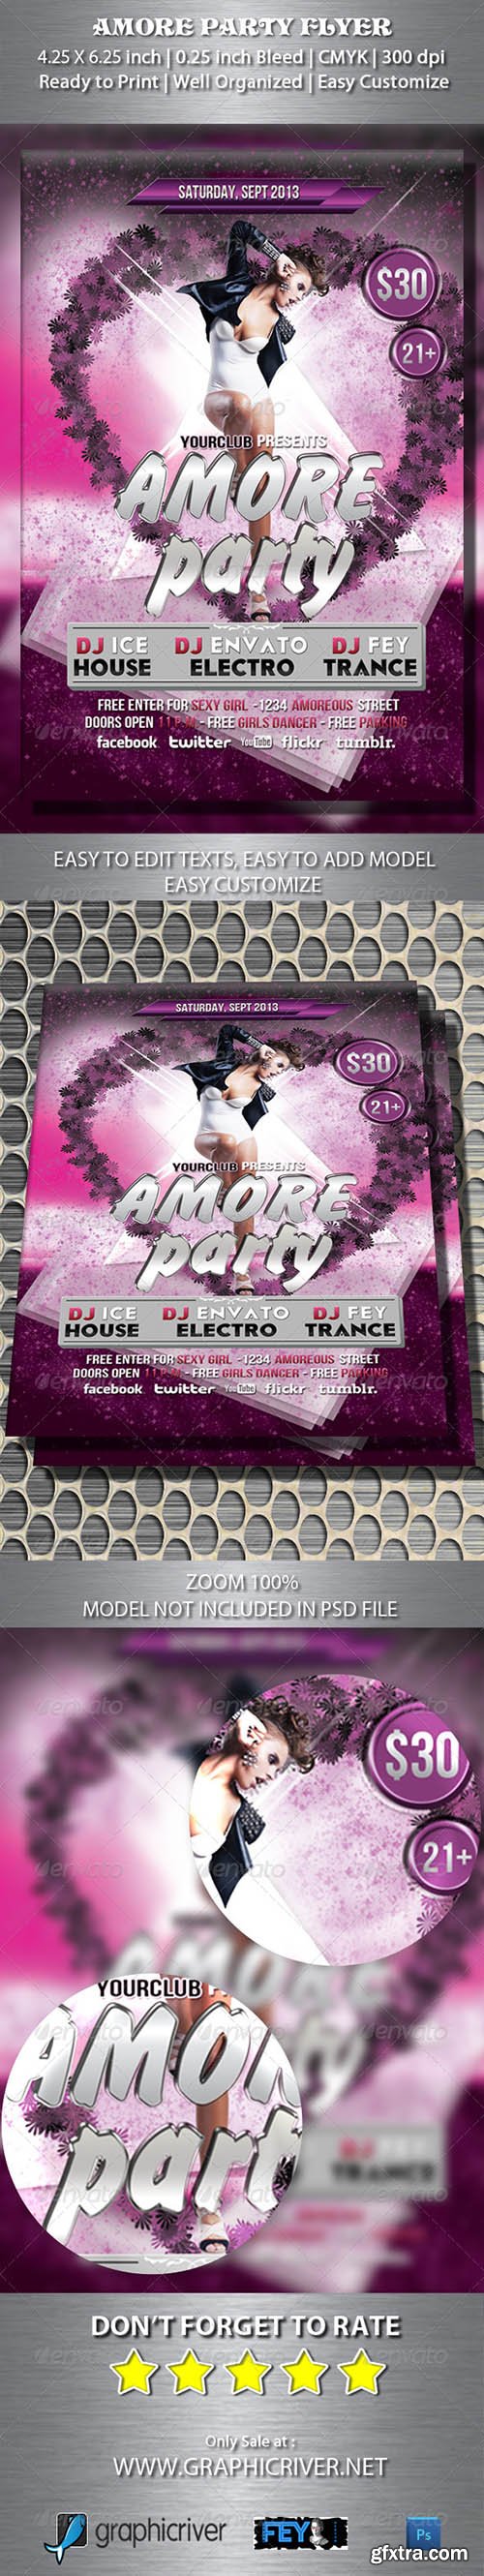 Graphicriver Amore Party Flyer 5365824